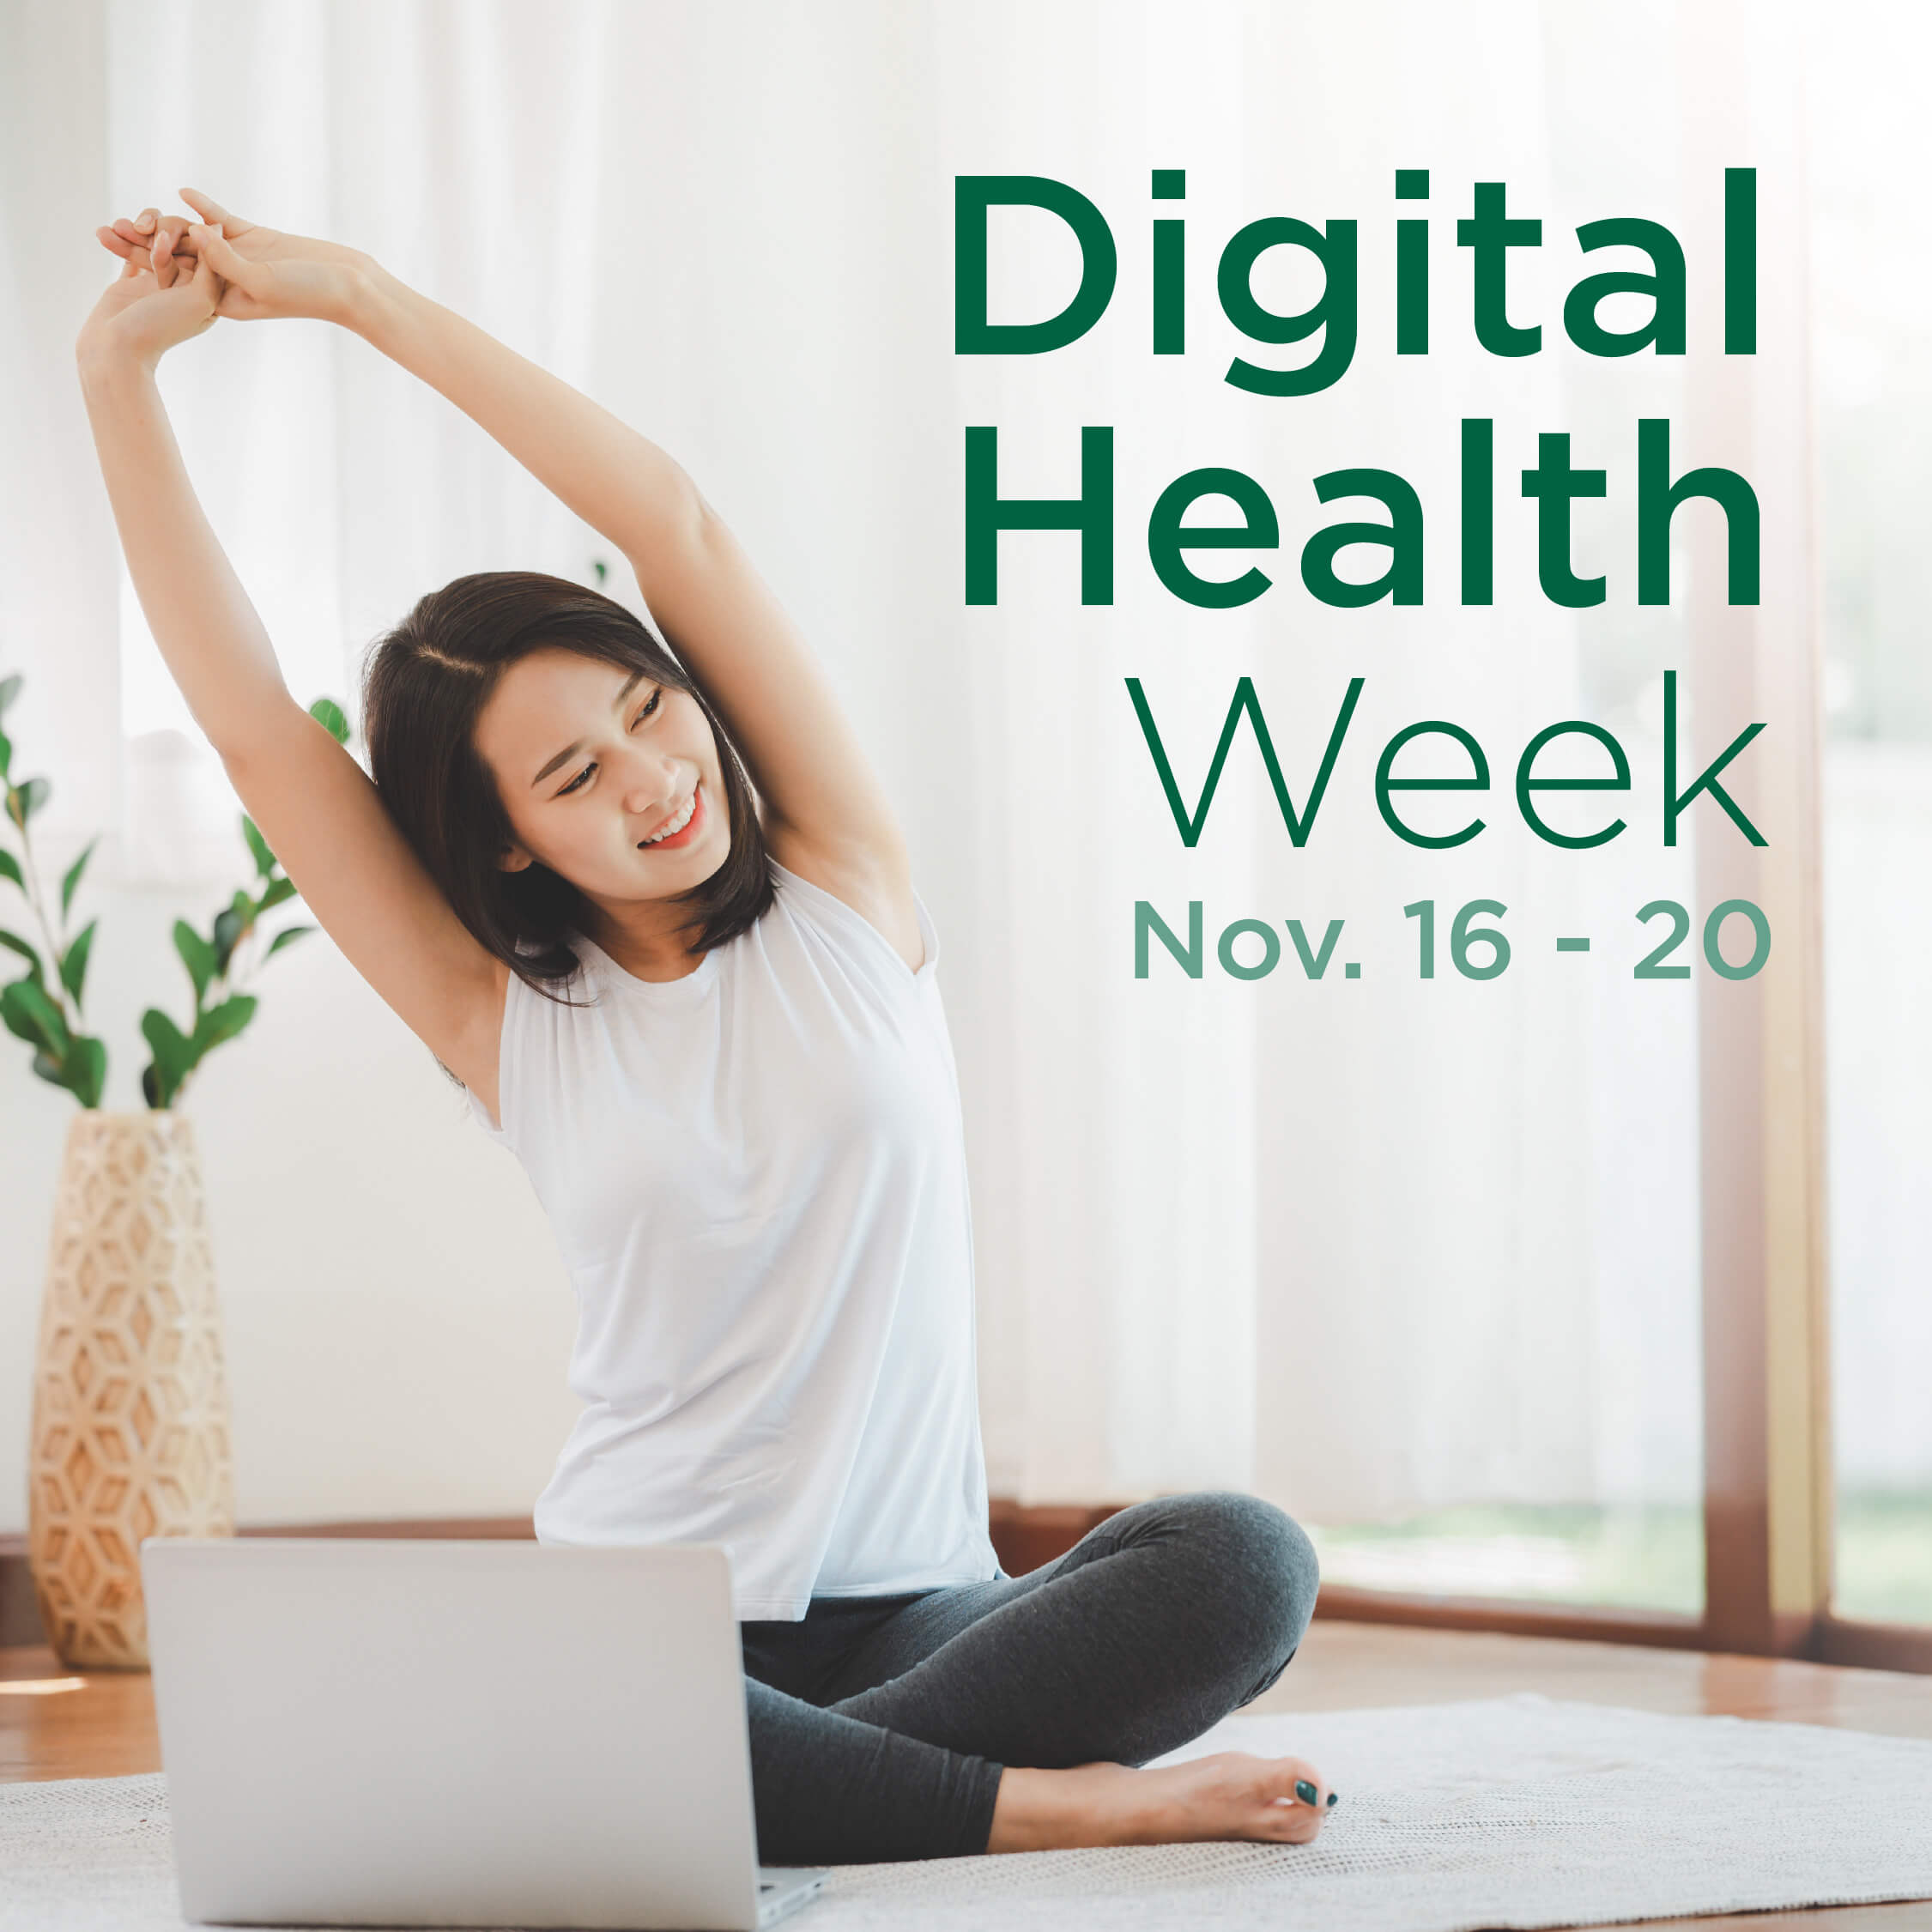 Digital Health Week Student Support Services